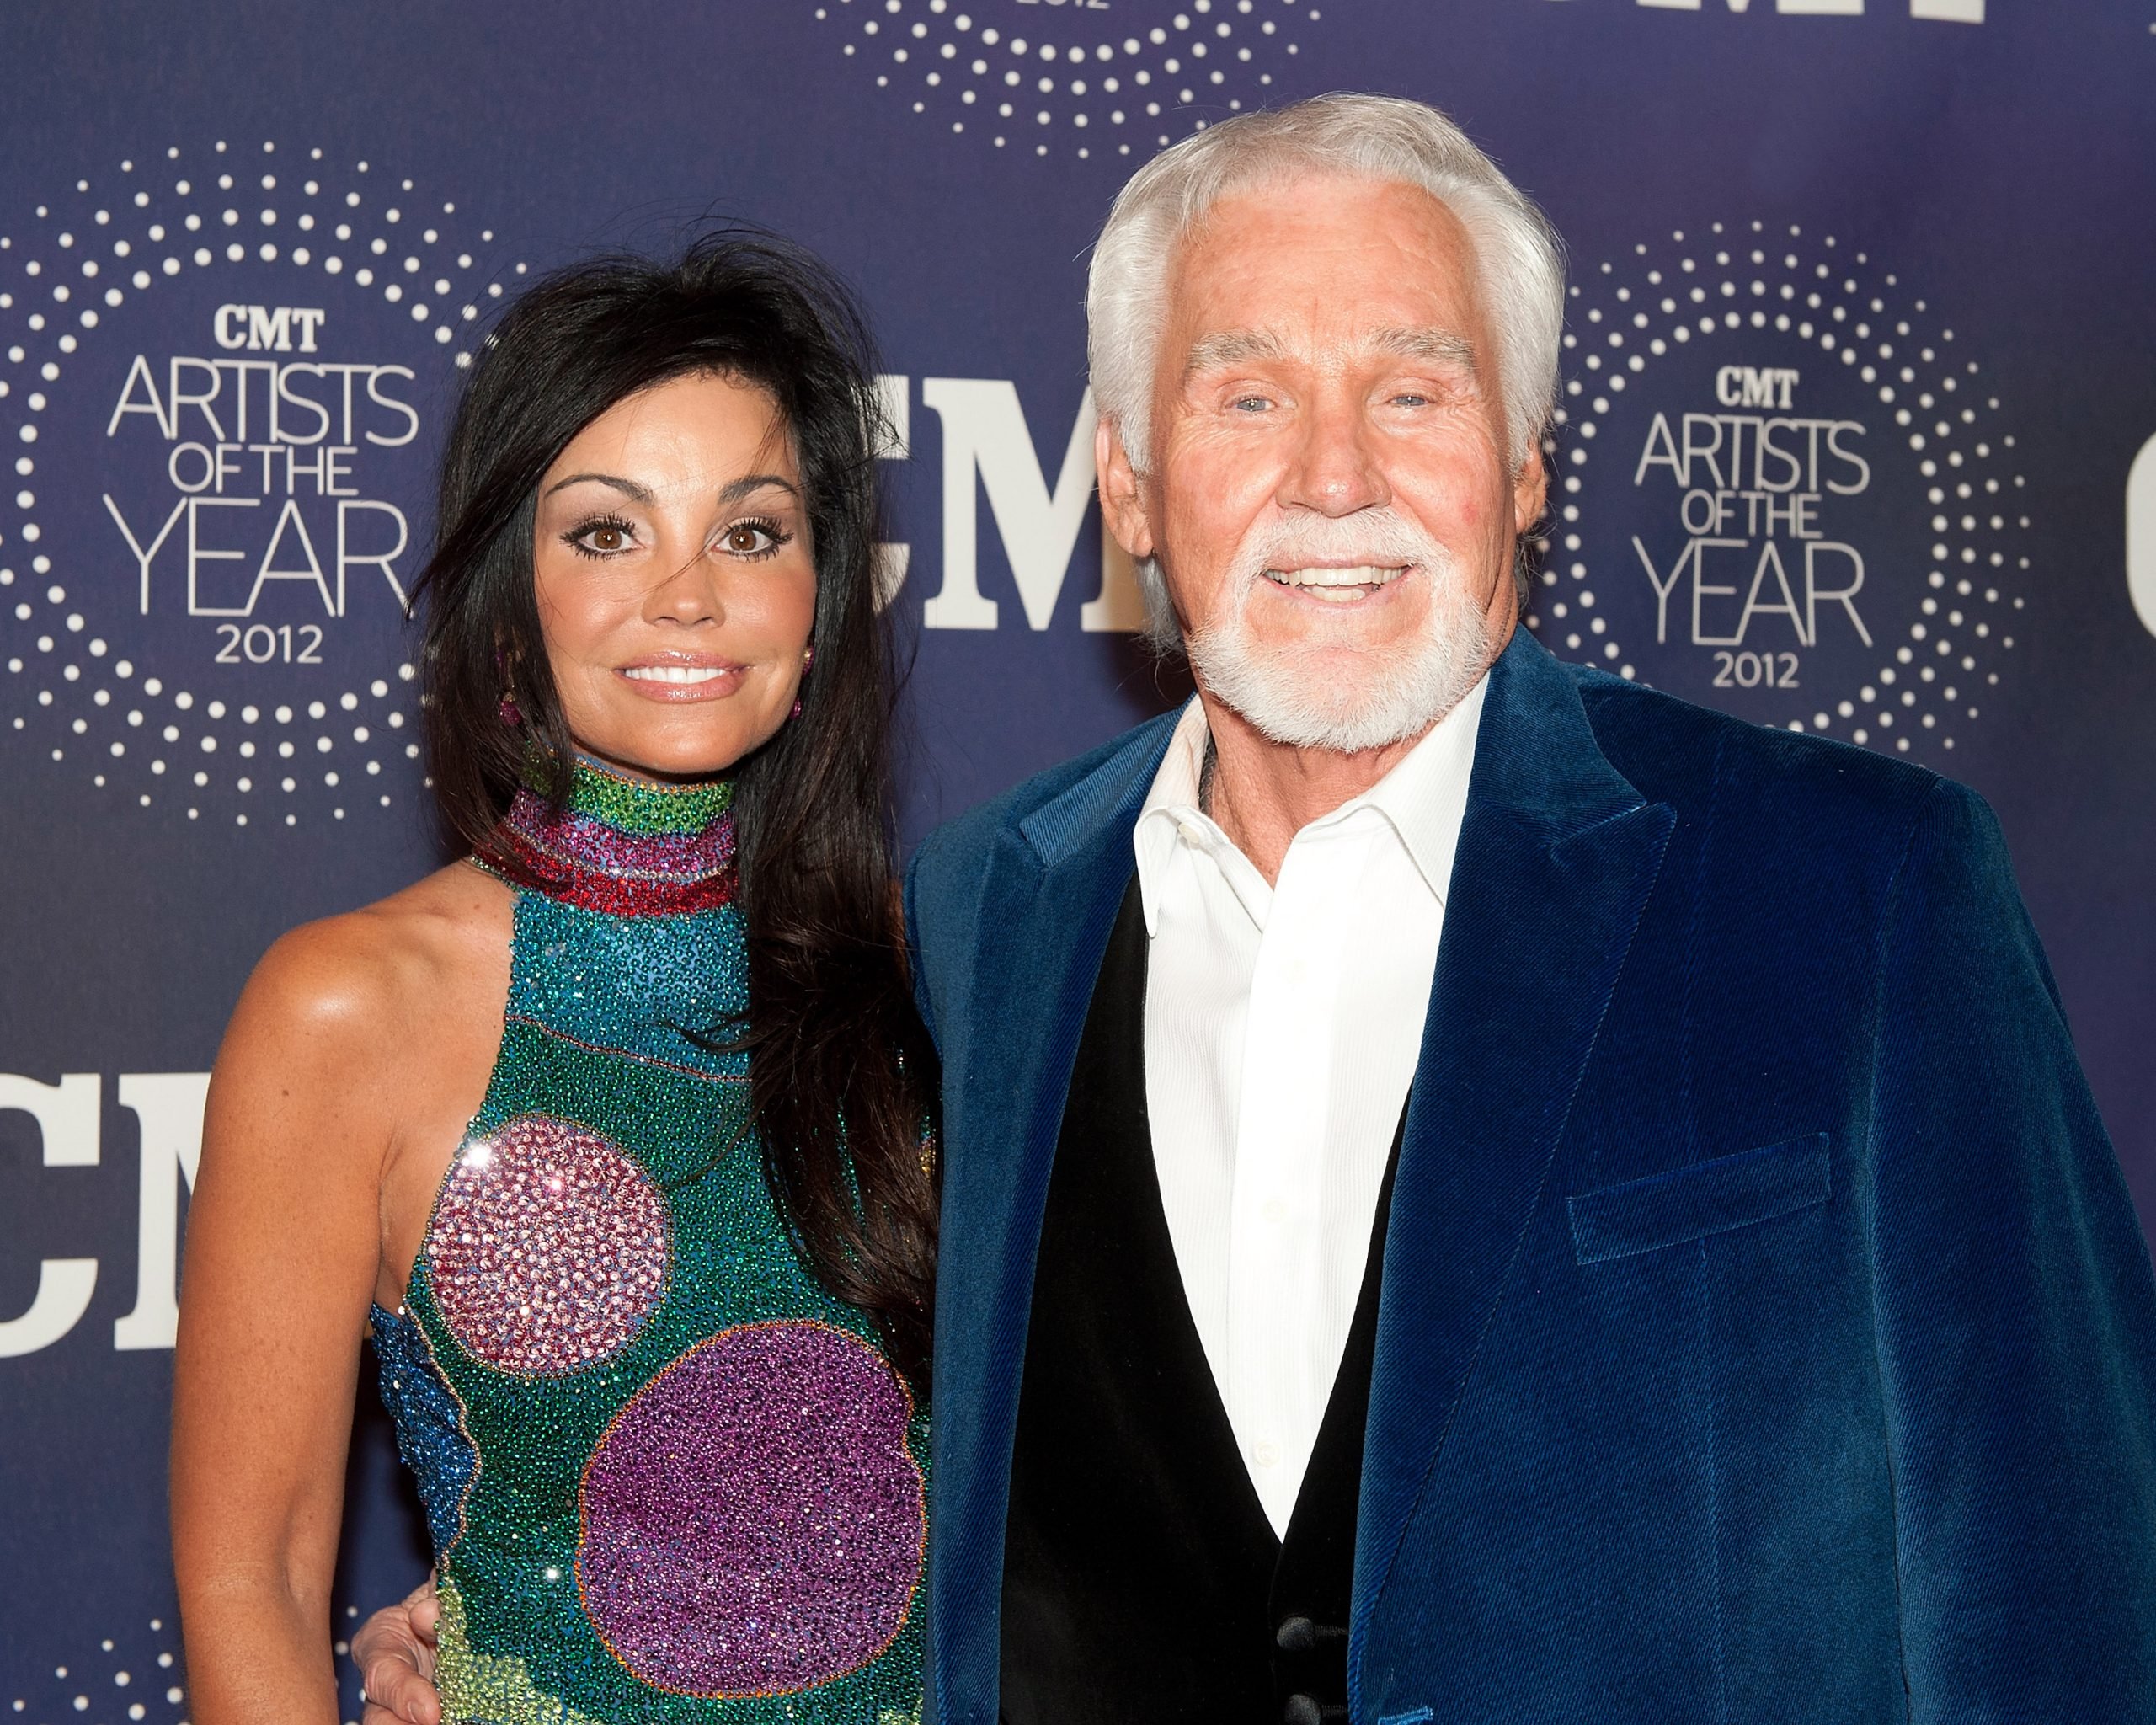 Kenny Rogers’ Abandoned Former Mansion Is an $8.5 Million Eyesore